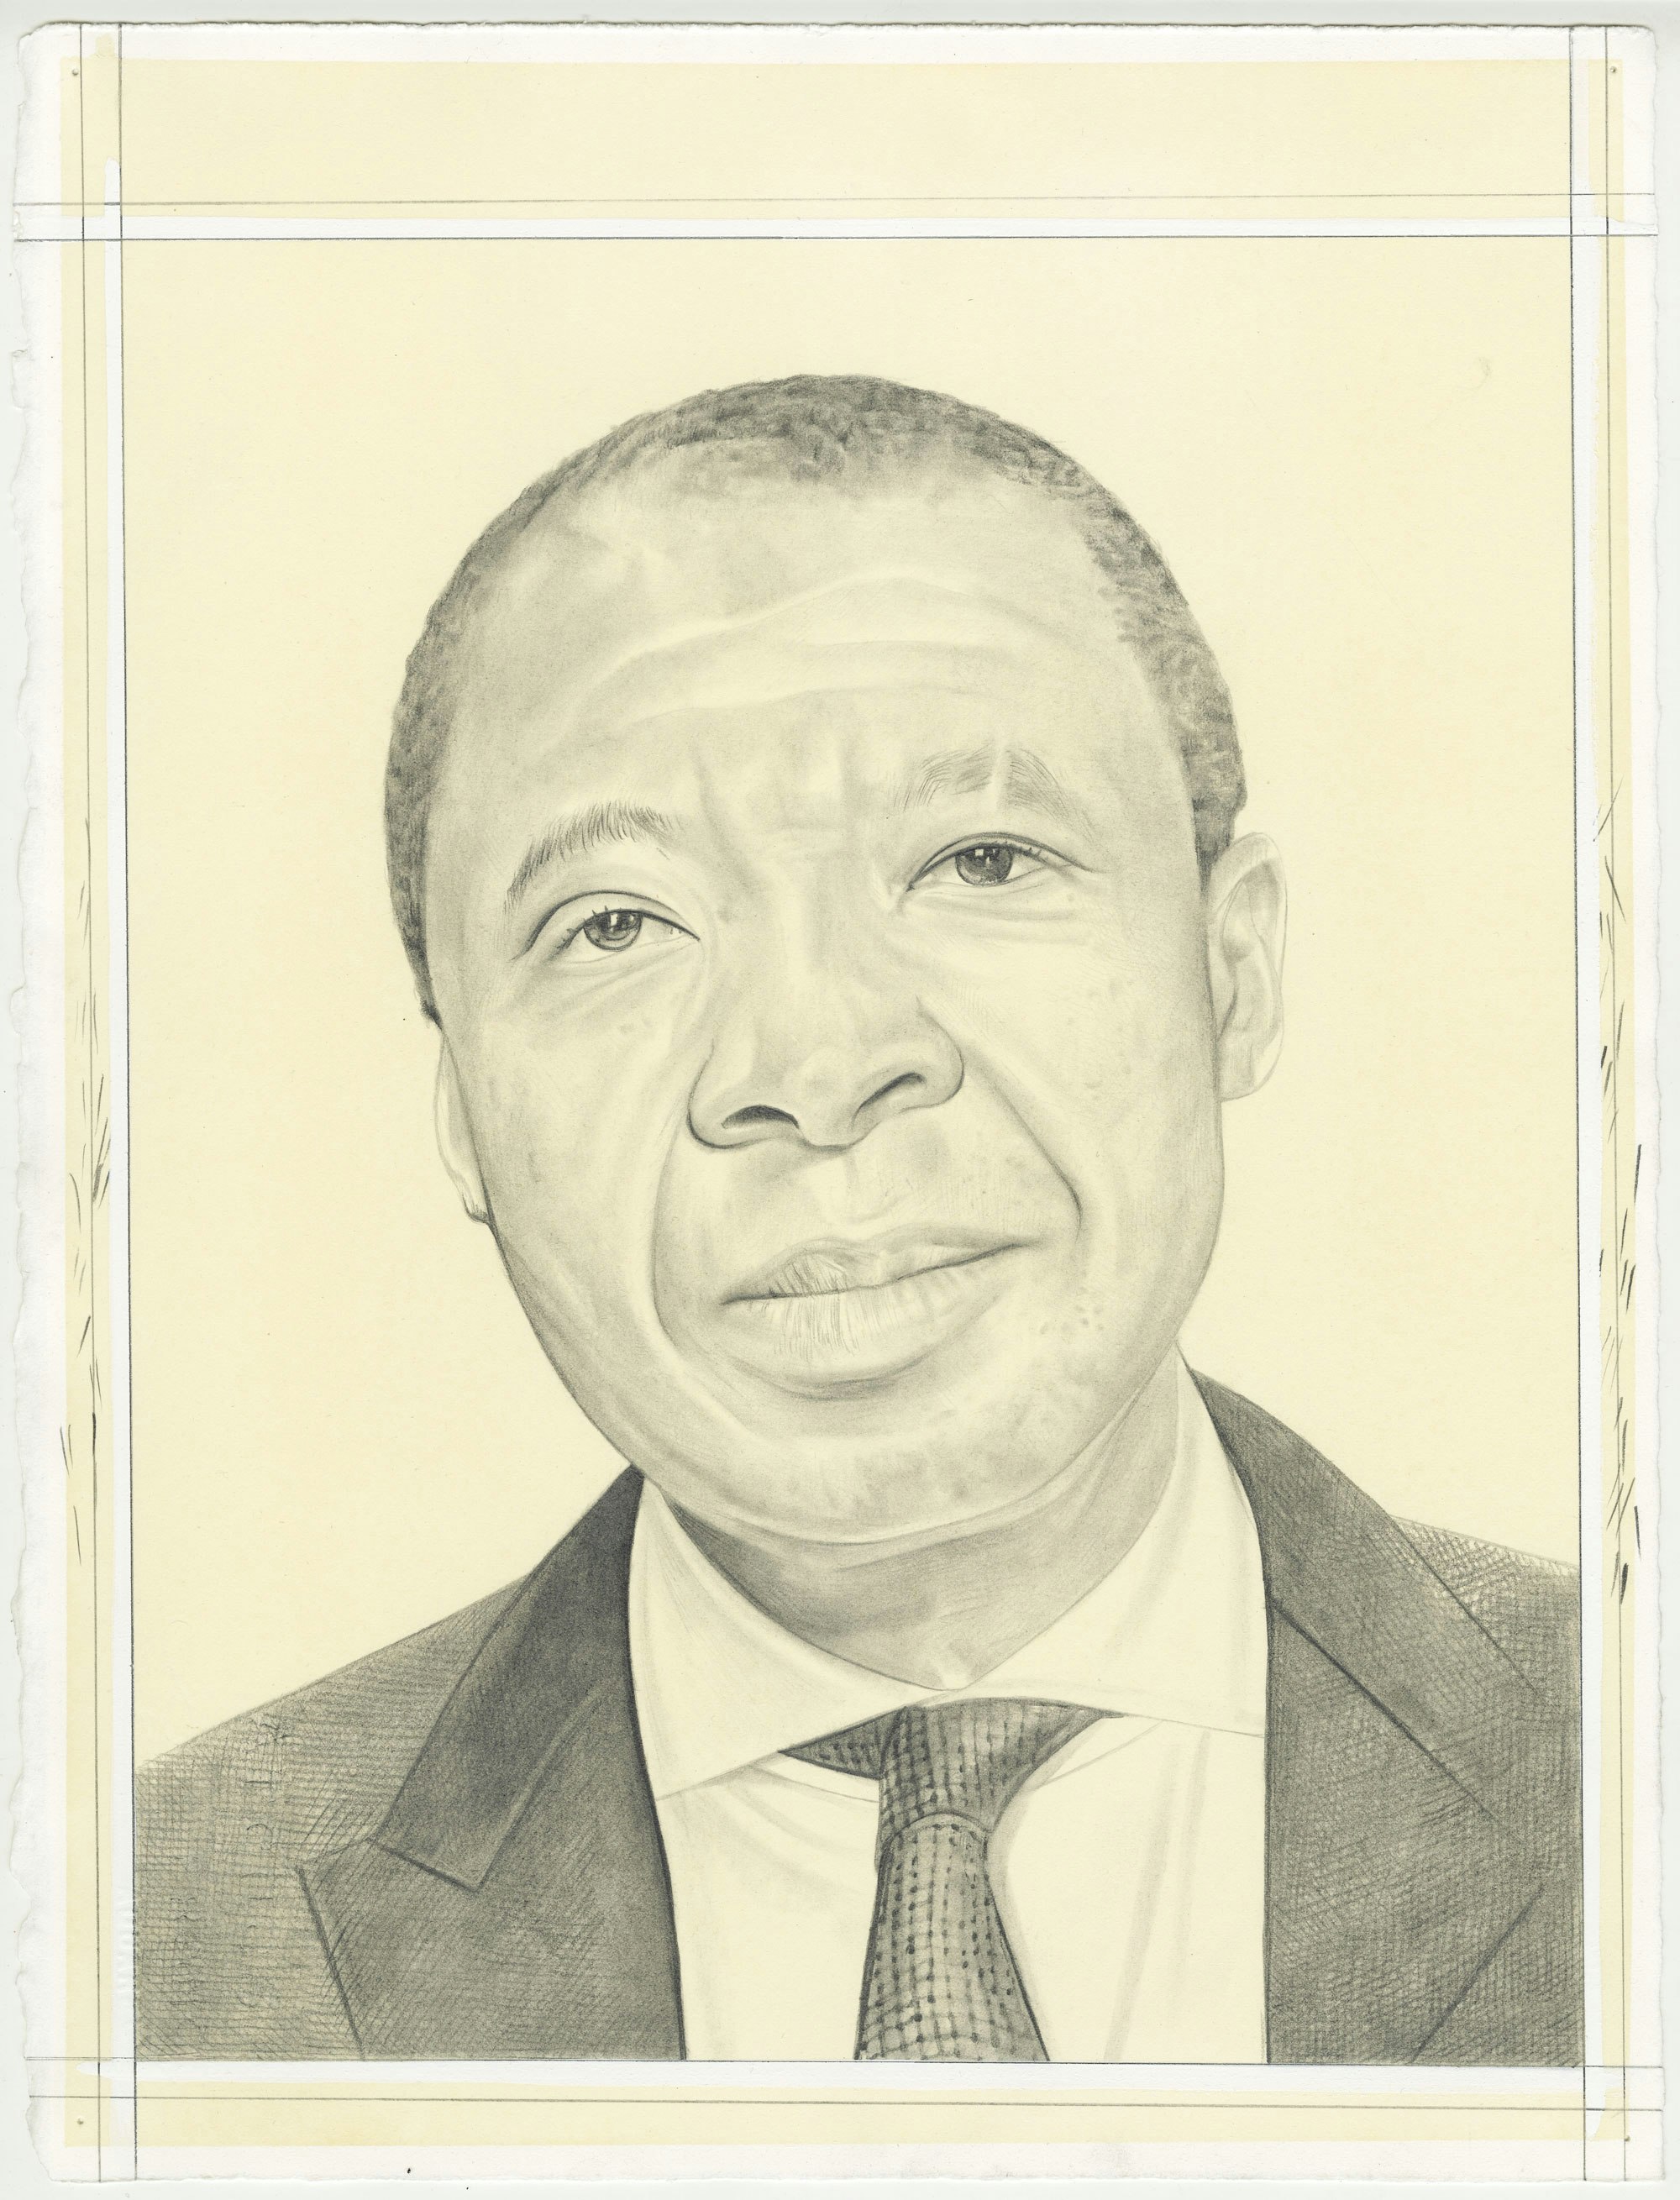 Portrait of Okwui Enwezor, pencil on paper by Phong Bui.